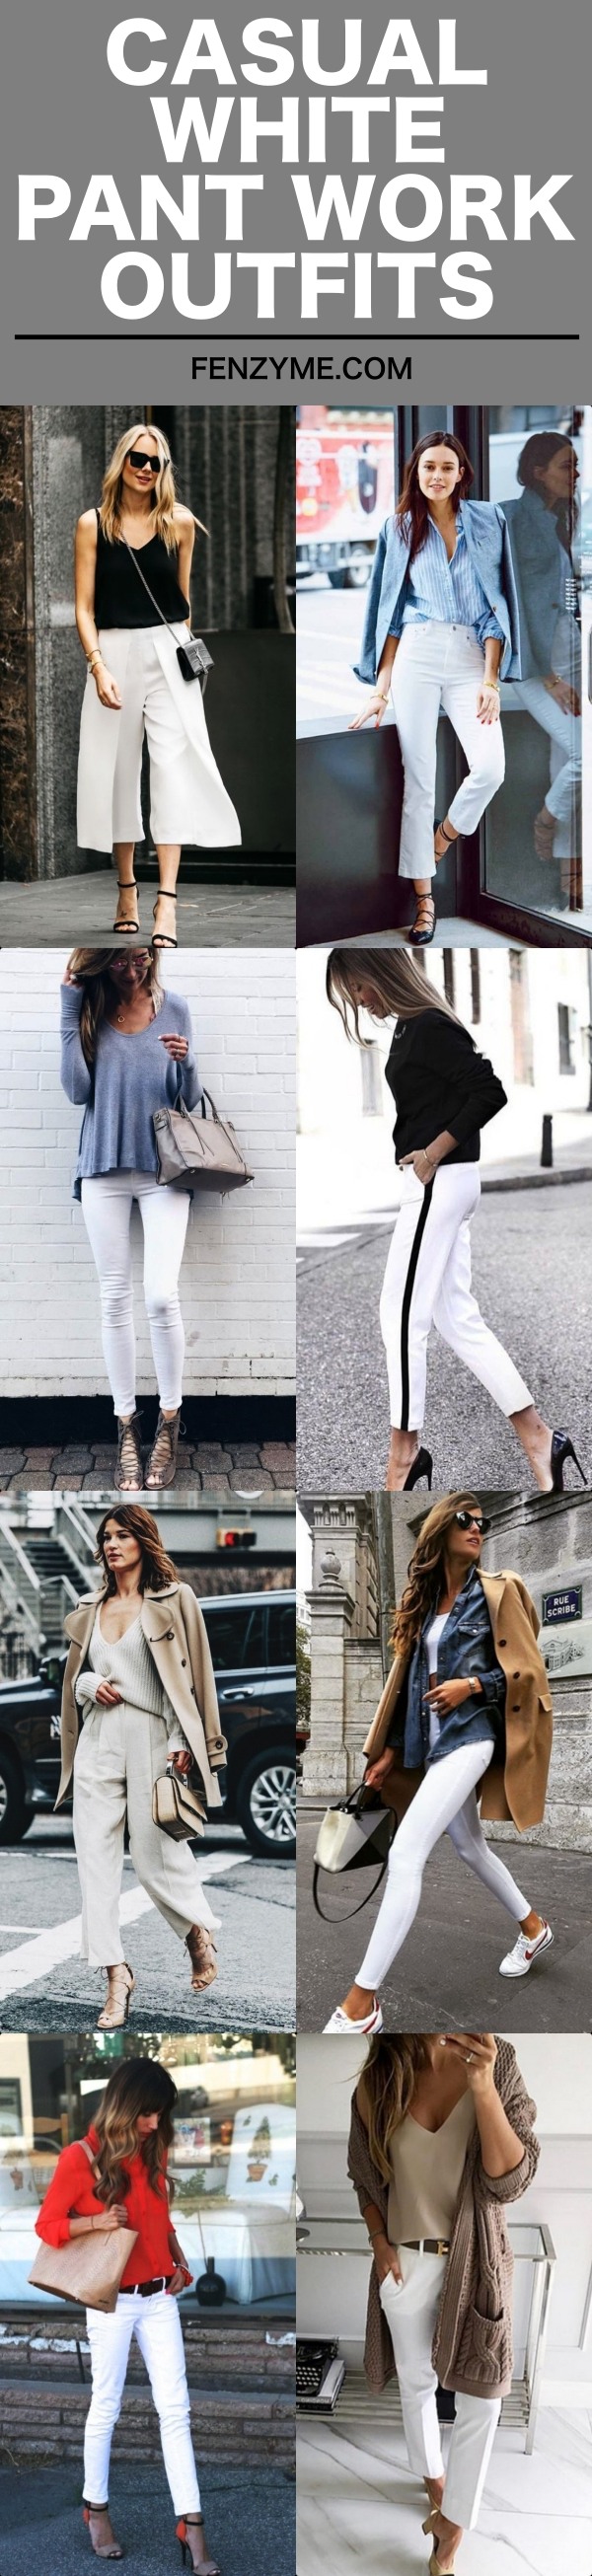 Casual White Pant Work Outfits